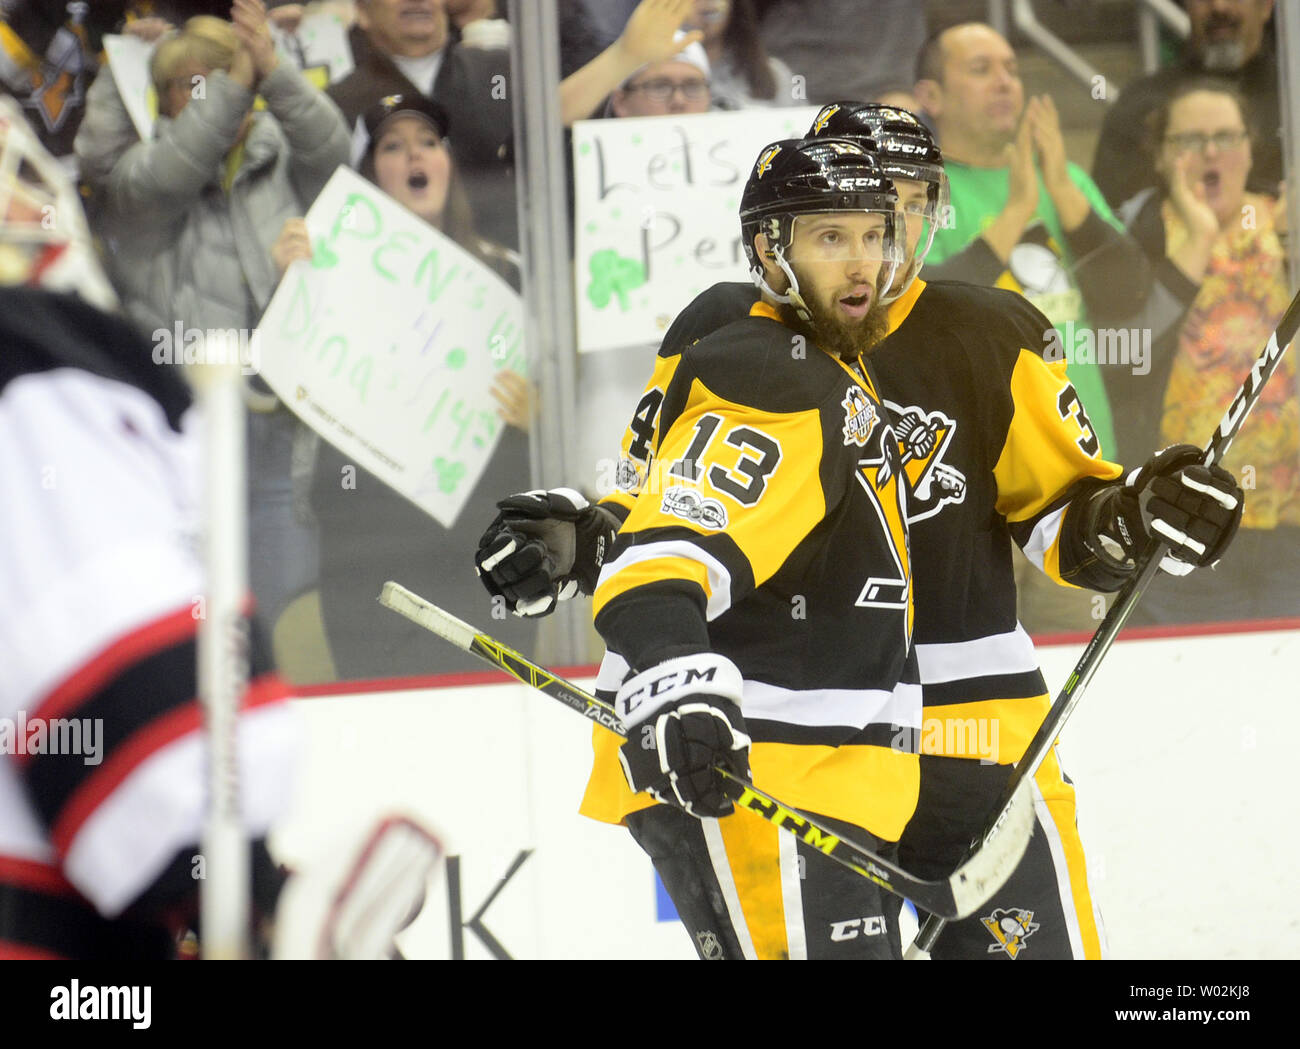 https://c8.alamy.com/comp/W02KJ8/pittsburgh-penguins-center-nick-bonino-13-celebrates-his-goal-with-pittsburgh-penguins-right-wing-tom-kuhnhackl-34-in-the-second-period-against-the-new-jersey-devils-at-the-ppg-paints-arena-in-pittsburgh-on-march-17-2017-upiarchie-carpenter-W02KJ8.jpg